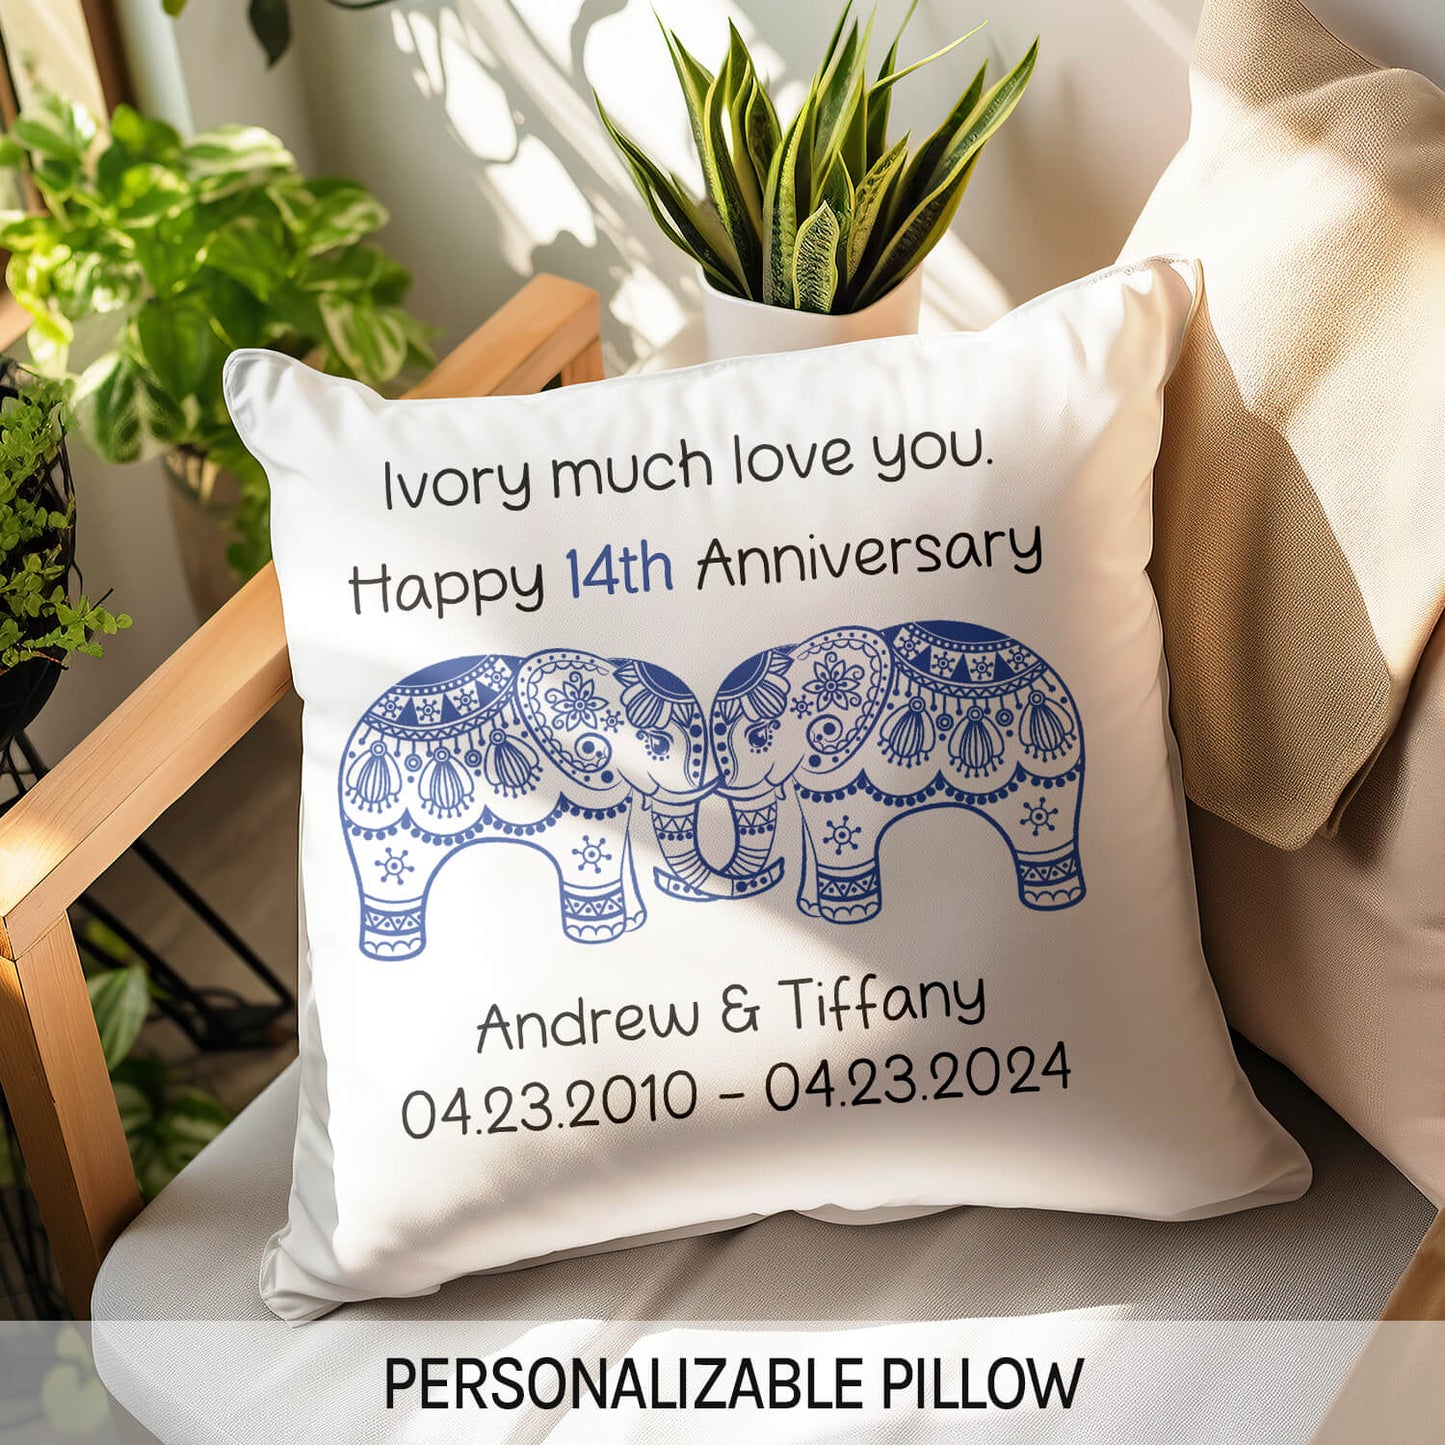 Ivory Much Love You - Personalized 14 Year Anniversary gift For Husband or Wife - Custom Pillow - MyMindfulGifts